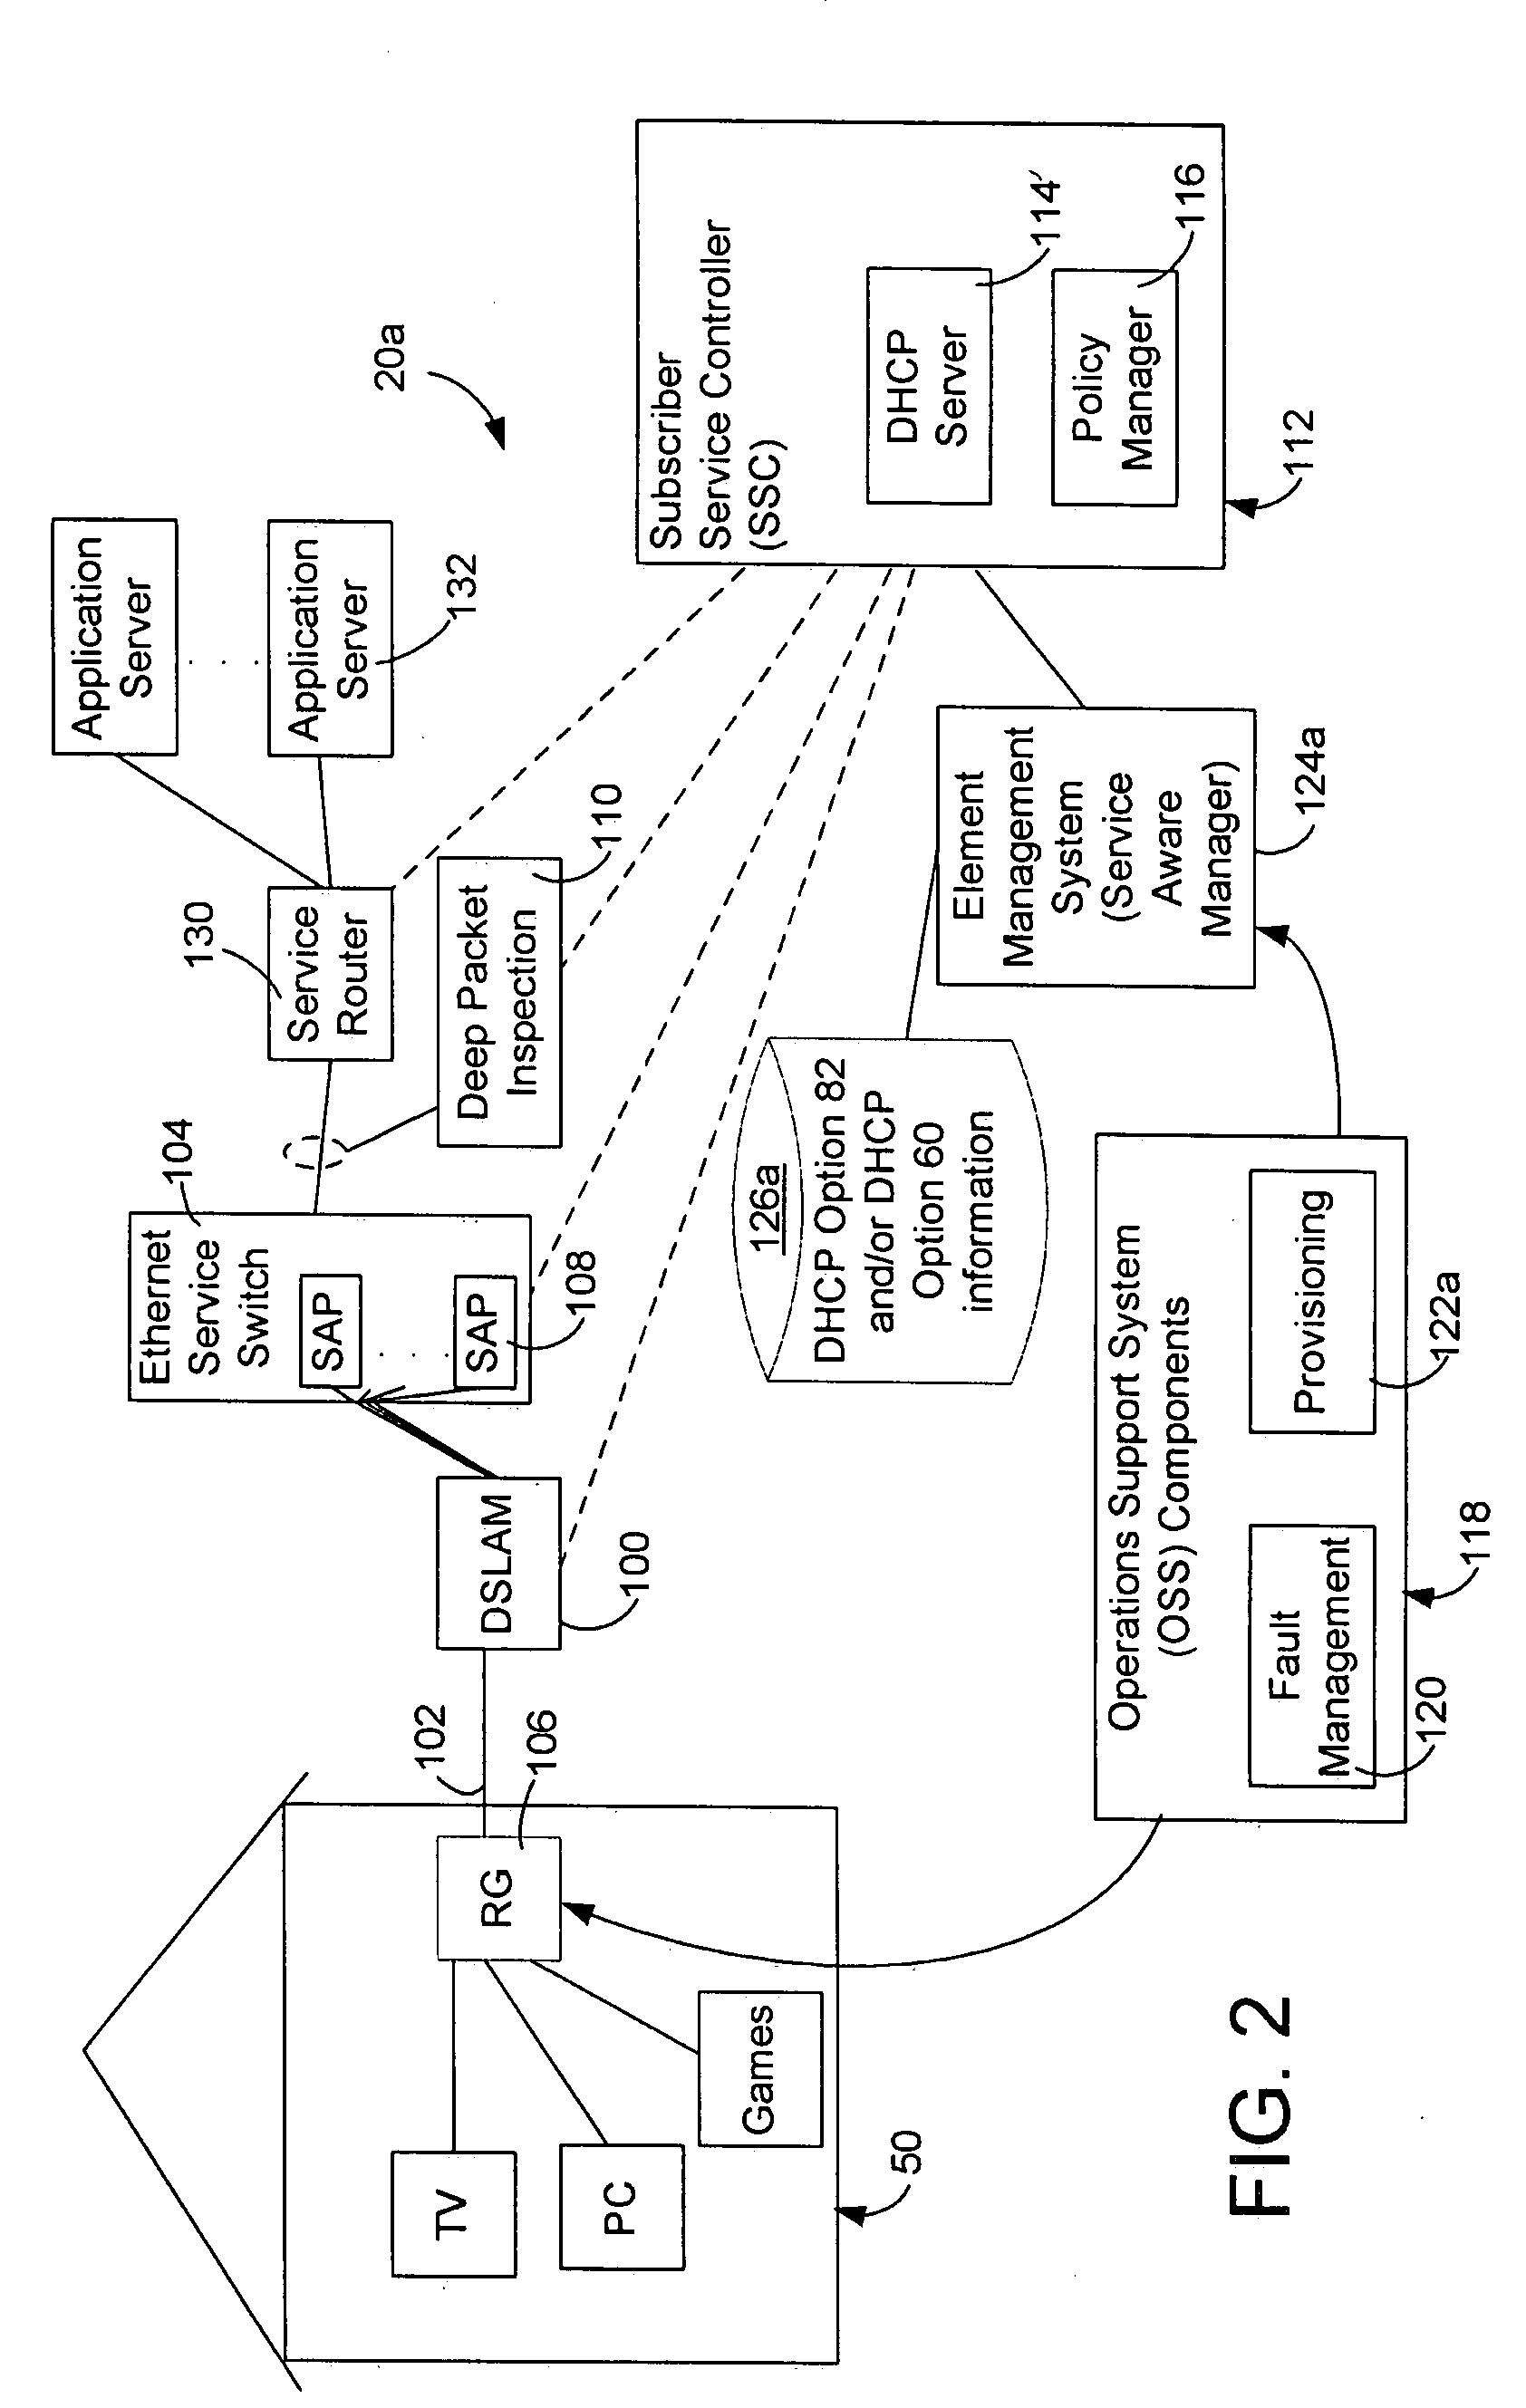 Triple play subscriber and policy management system and method of providing same